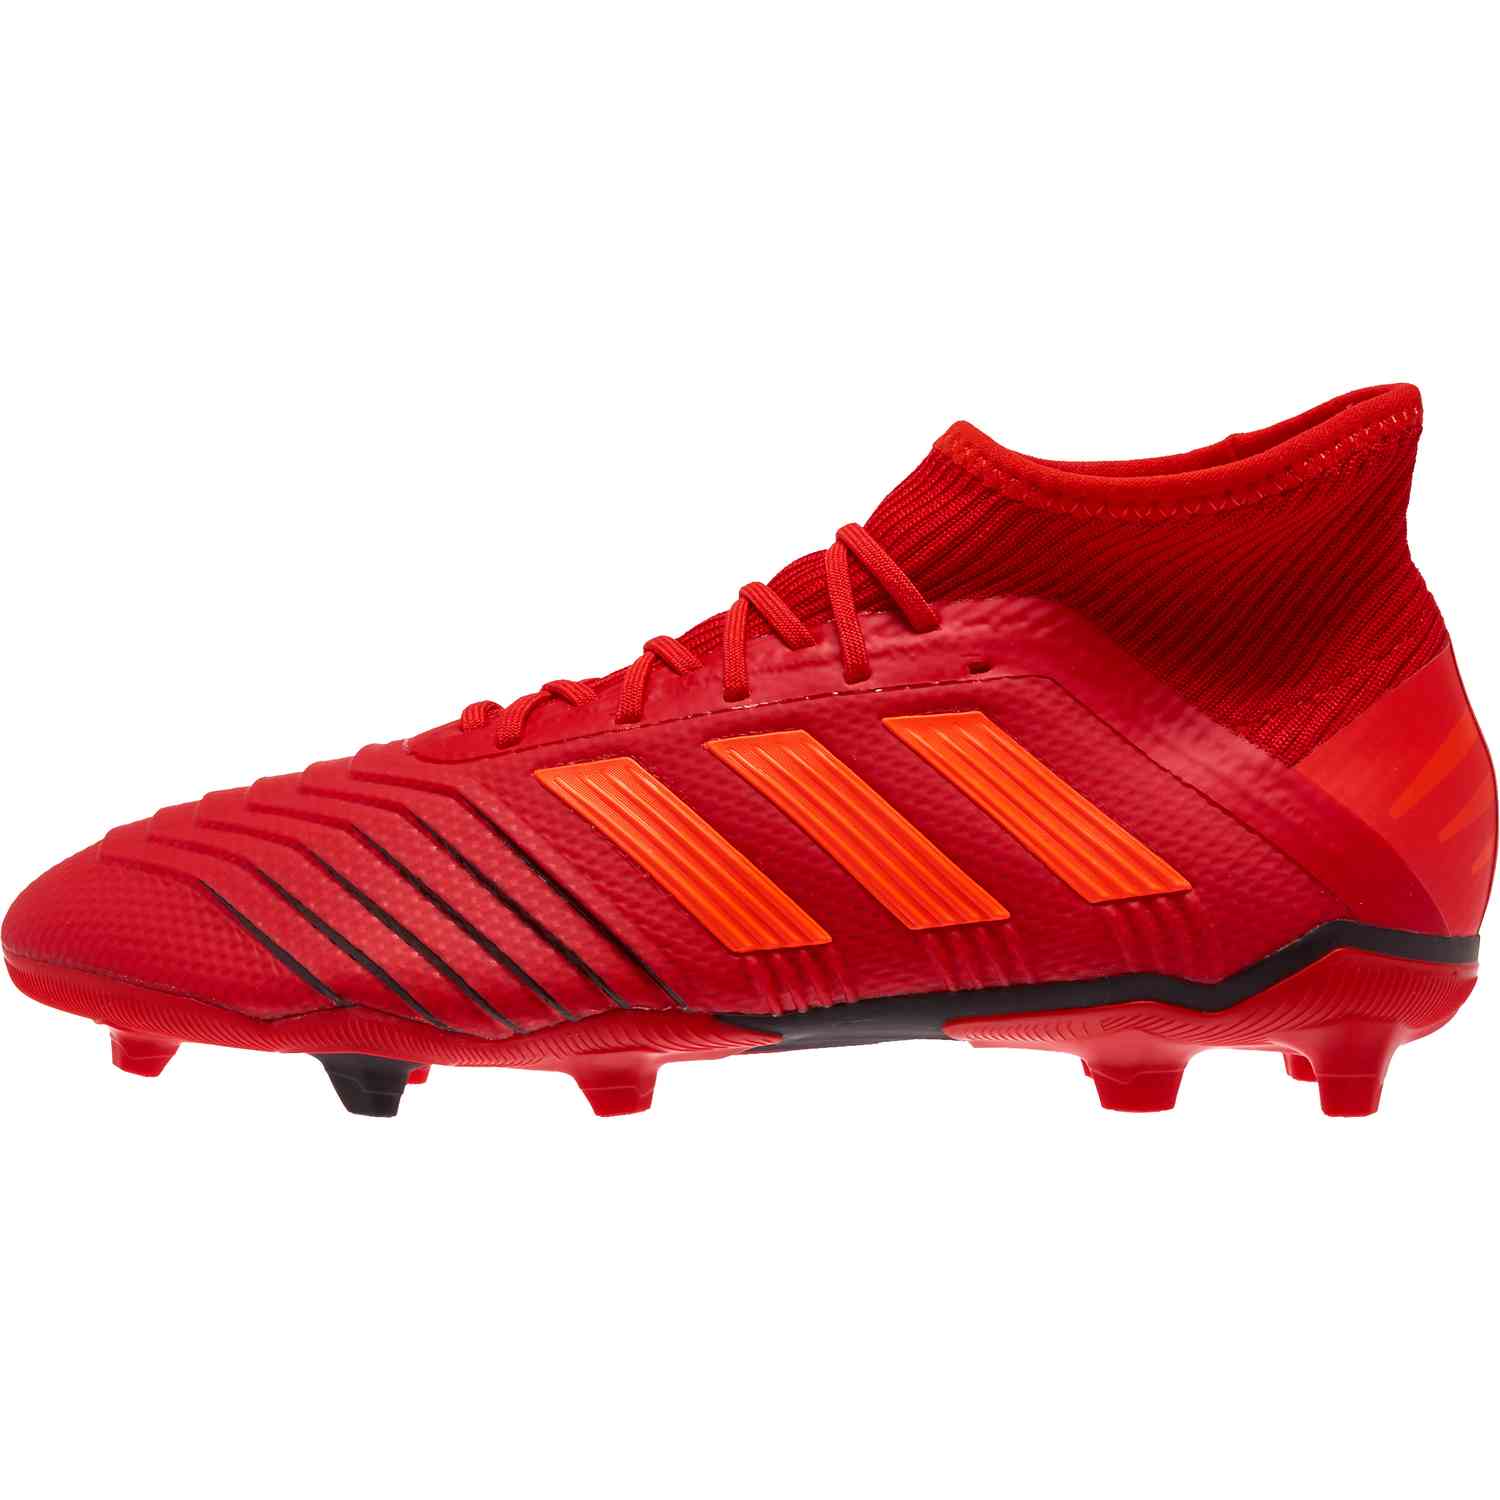 predator soccer cleats youth